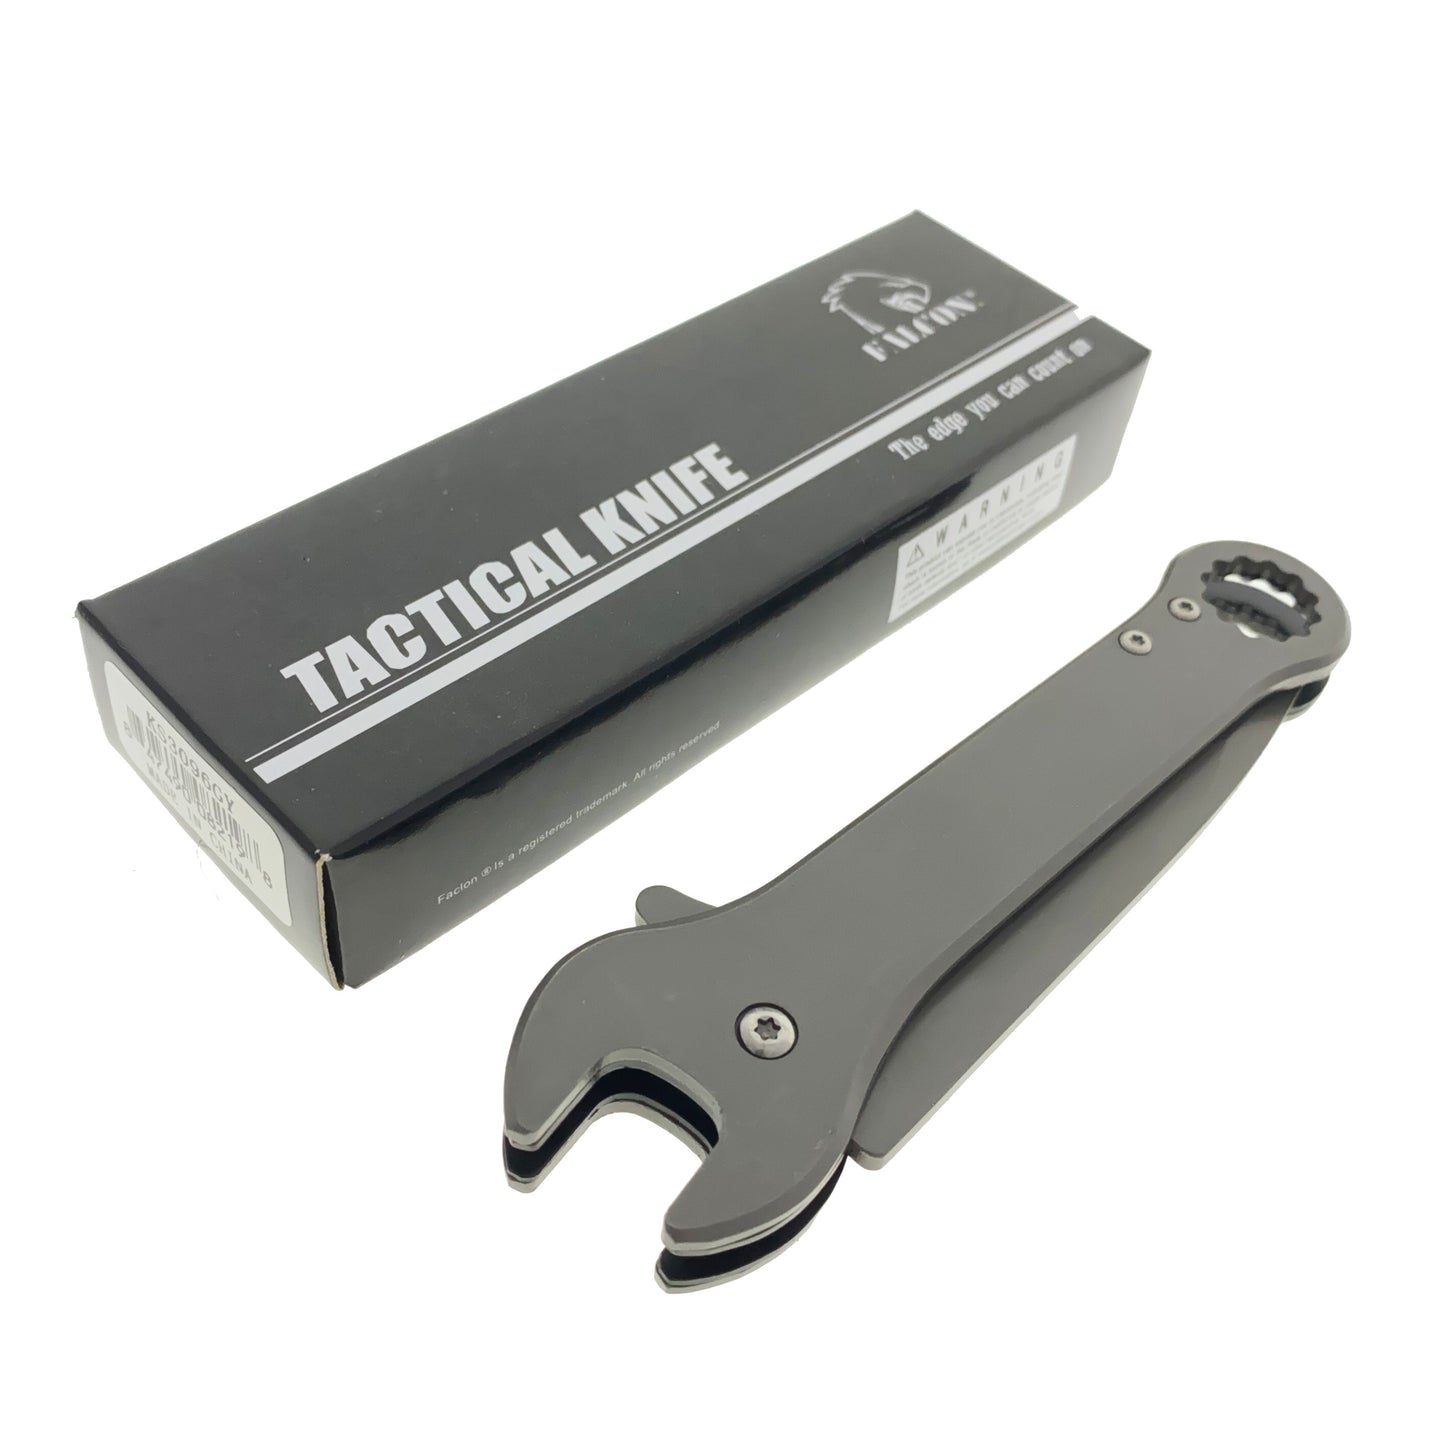 Falcon 7.75" Gray Spring Assisted Knife with 12 mm Wrench Function